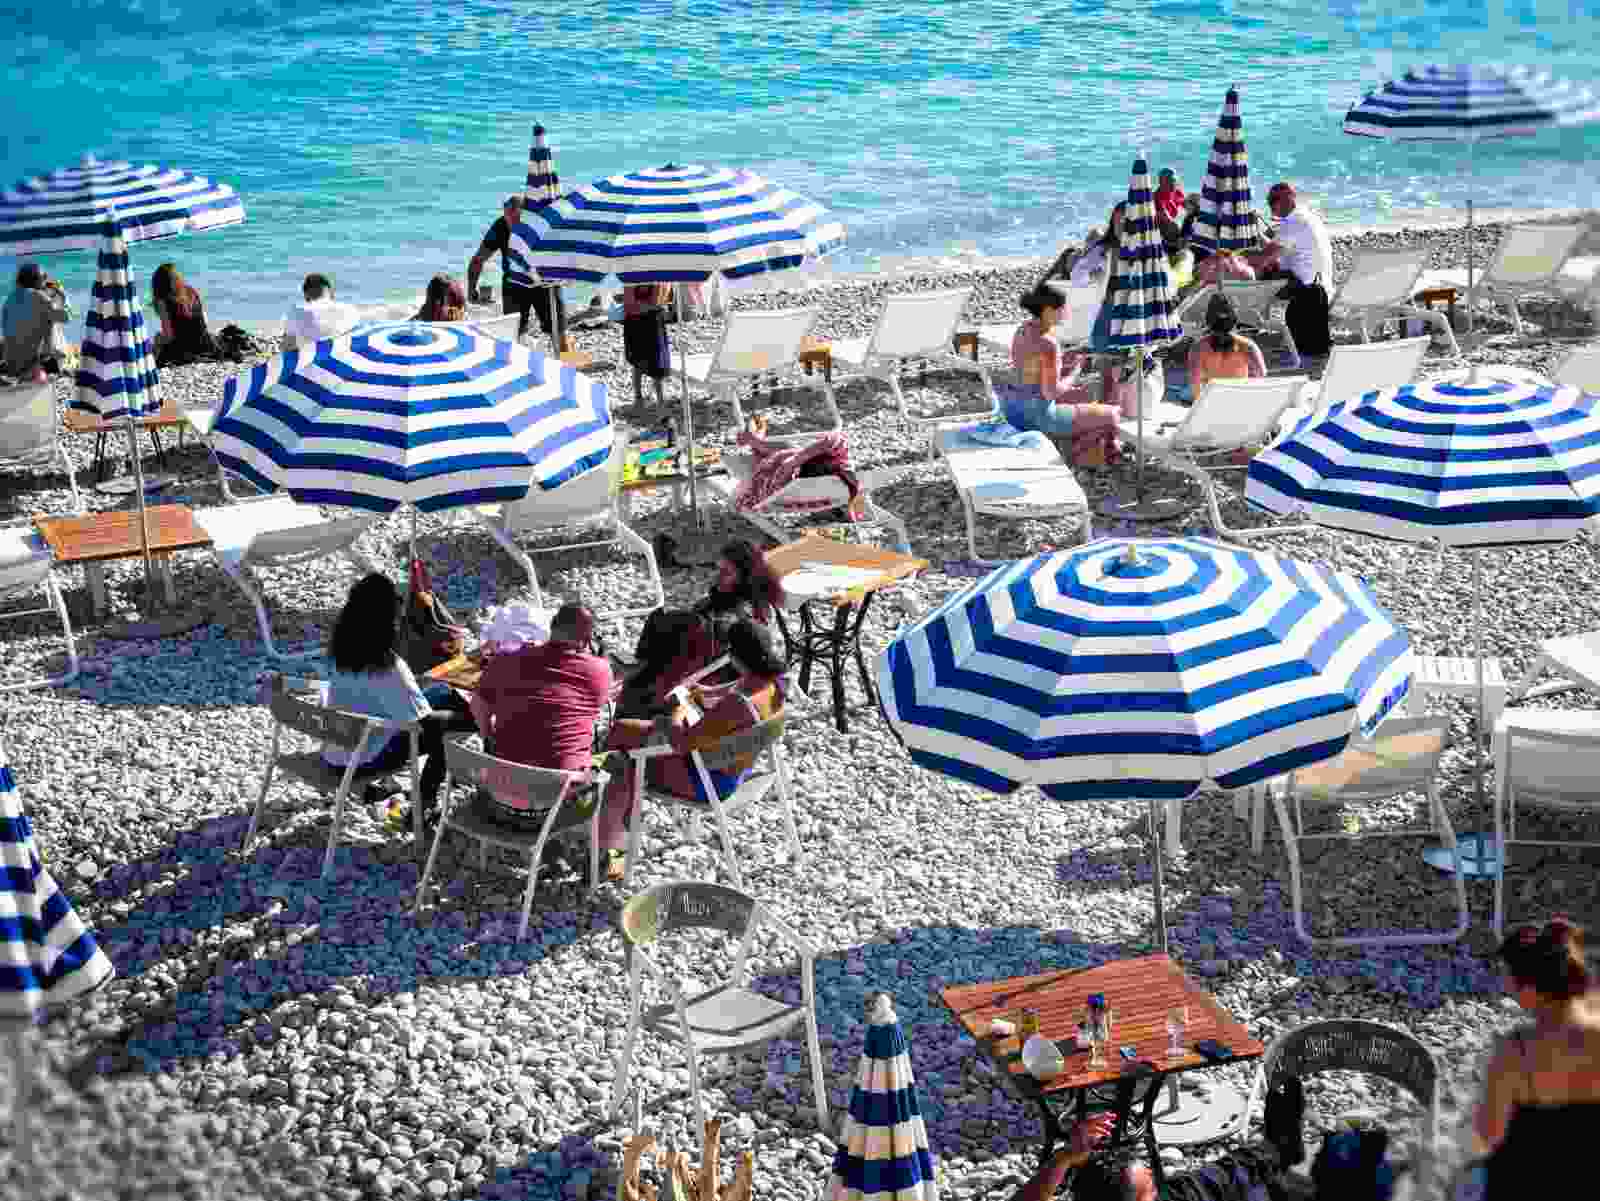 Photographing Nice, the Jewel of the Cote d’Azure